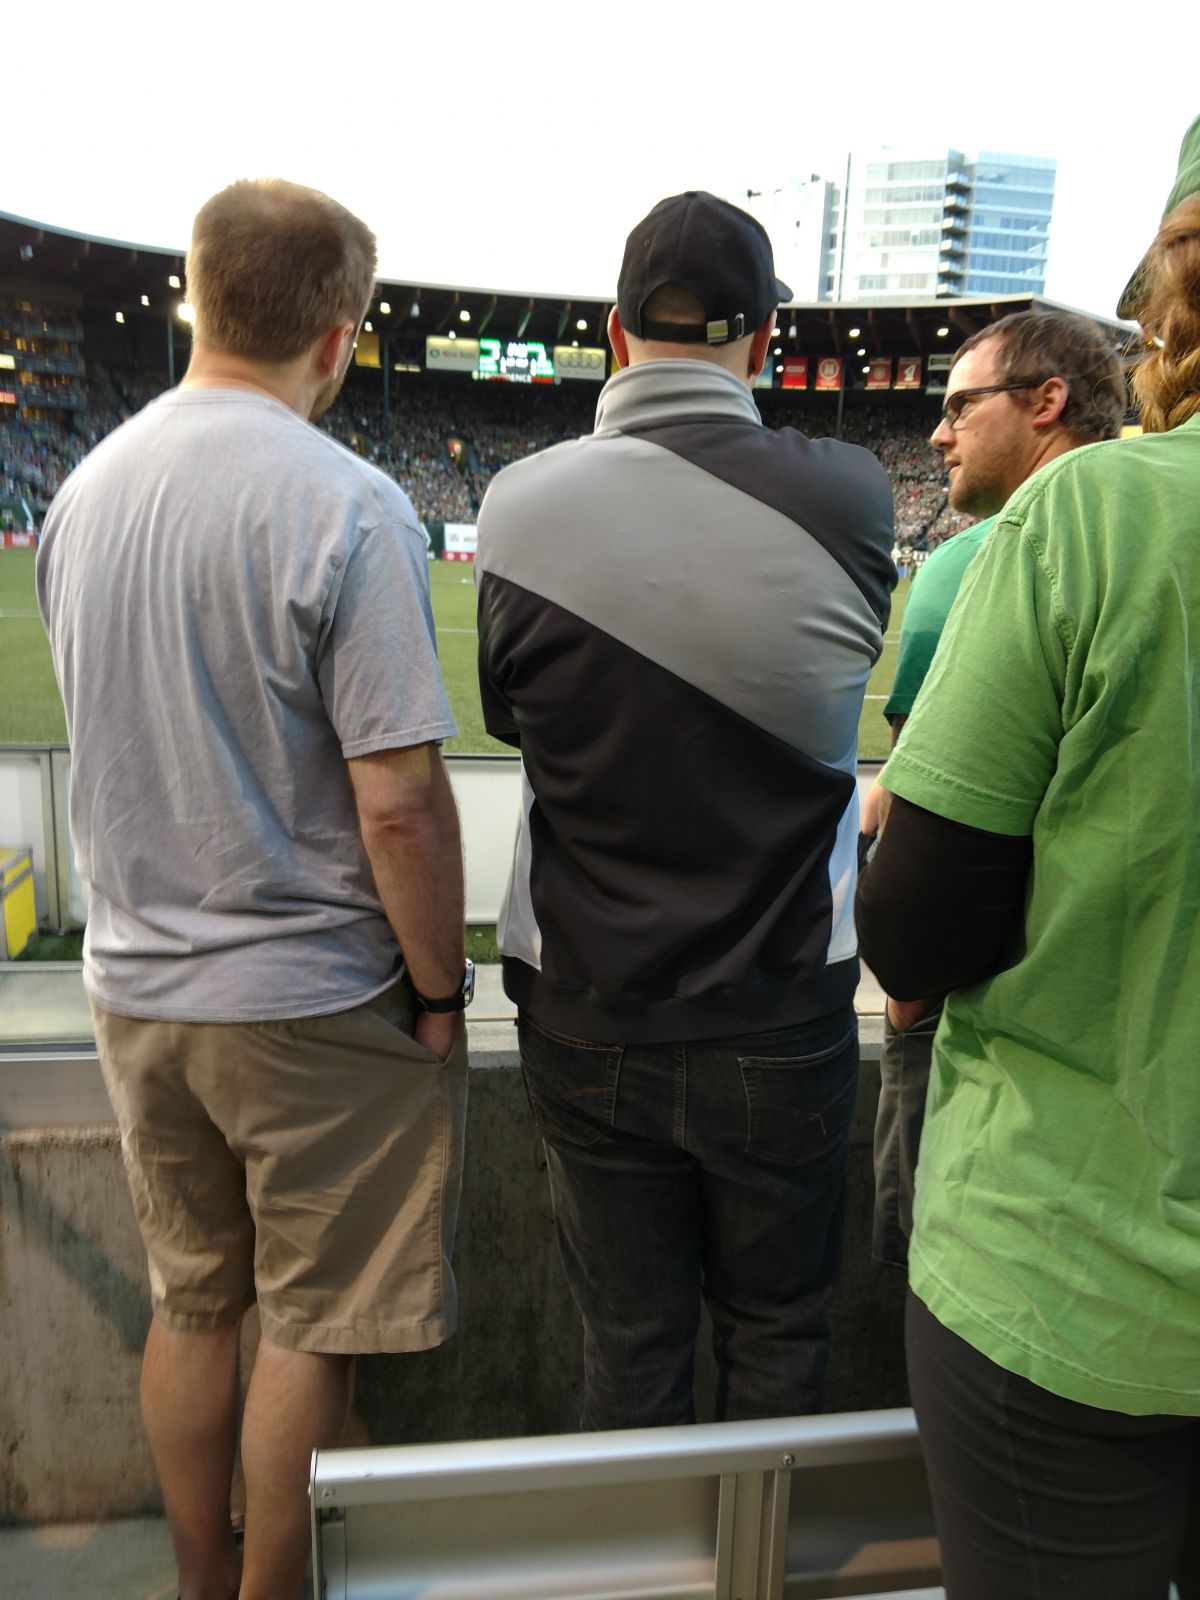 south deck 3, row c seat view  - providence park